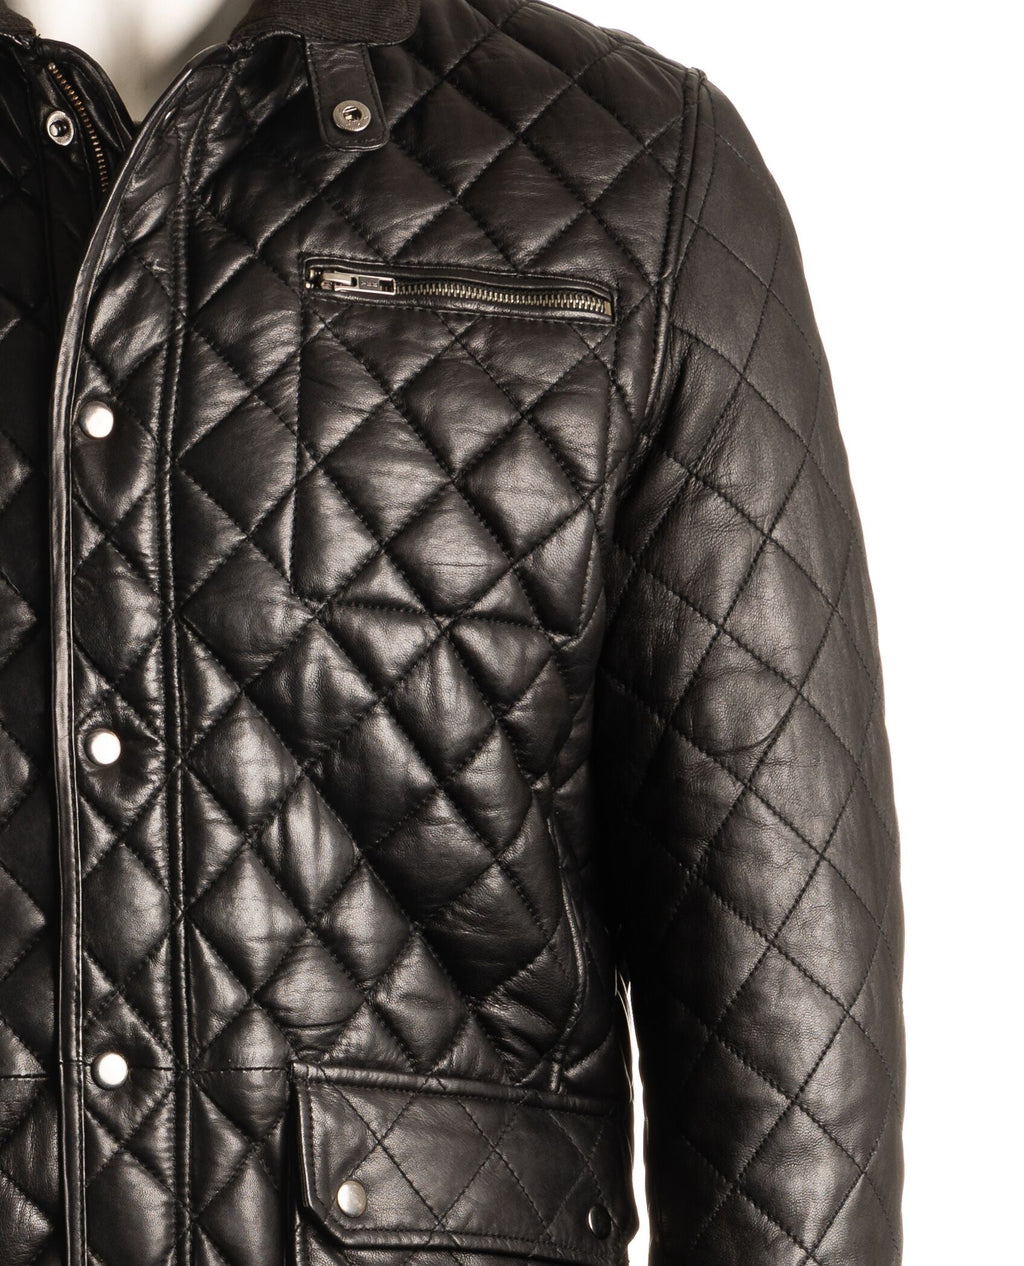 Men's Black Quilted Leather Coat with Diamond Stitch - Javier